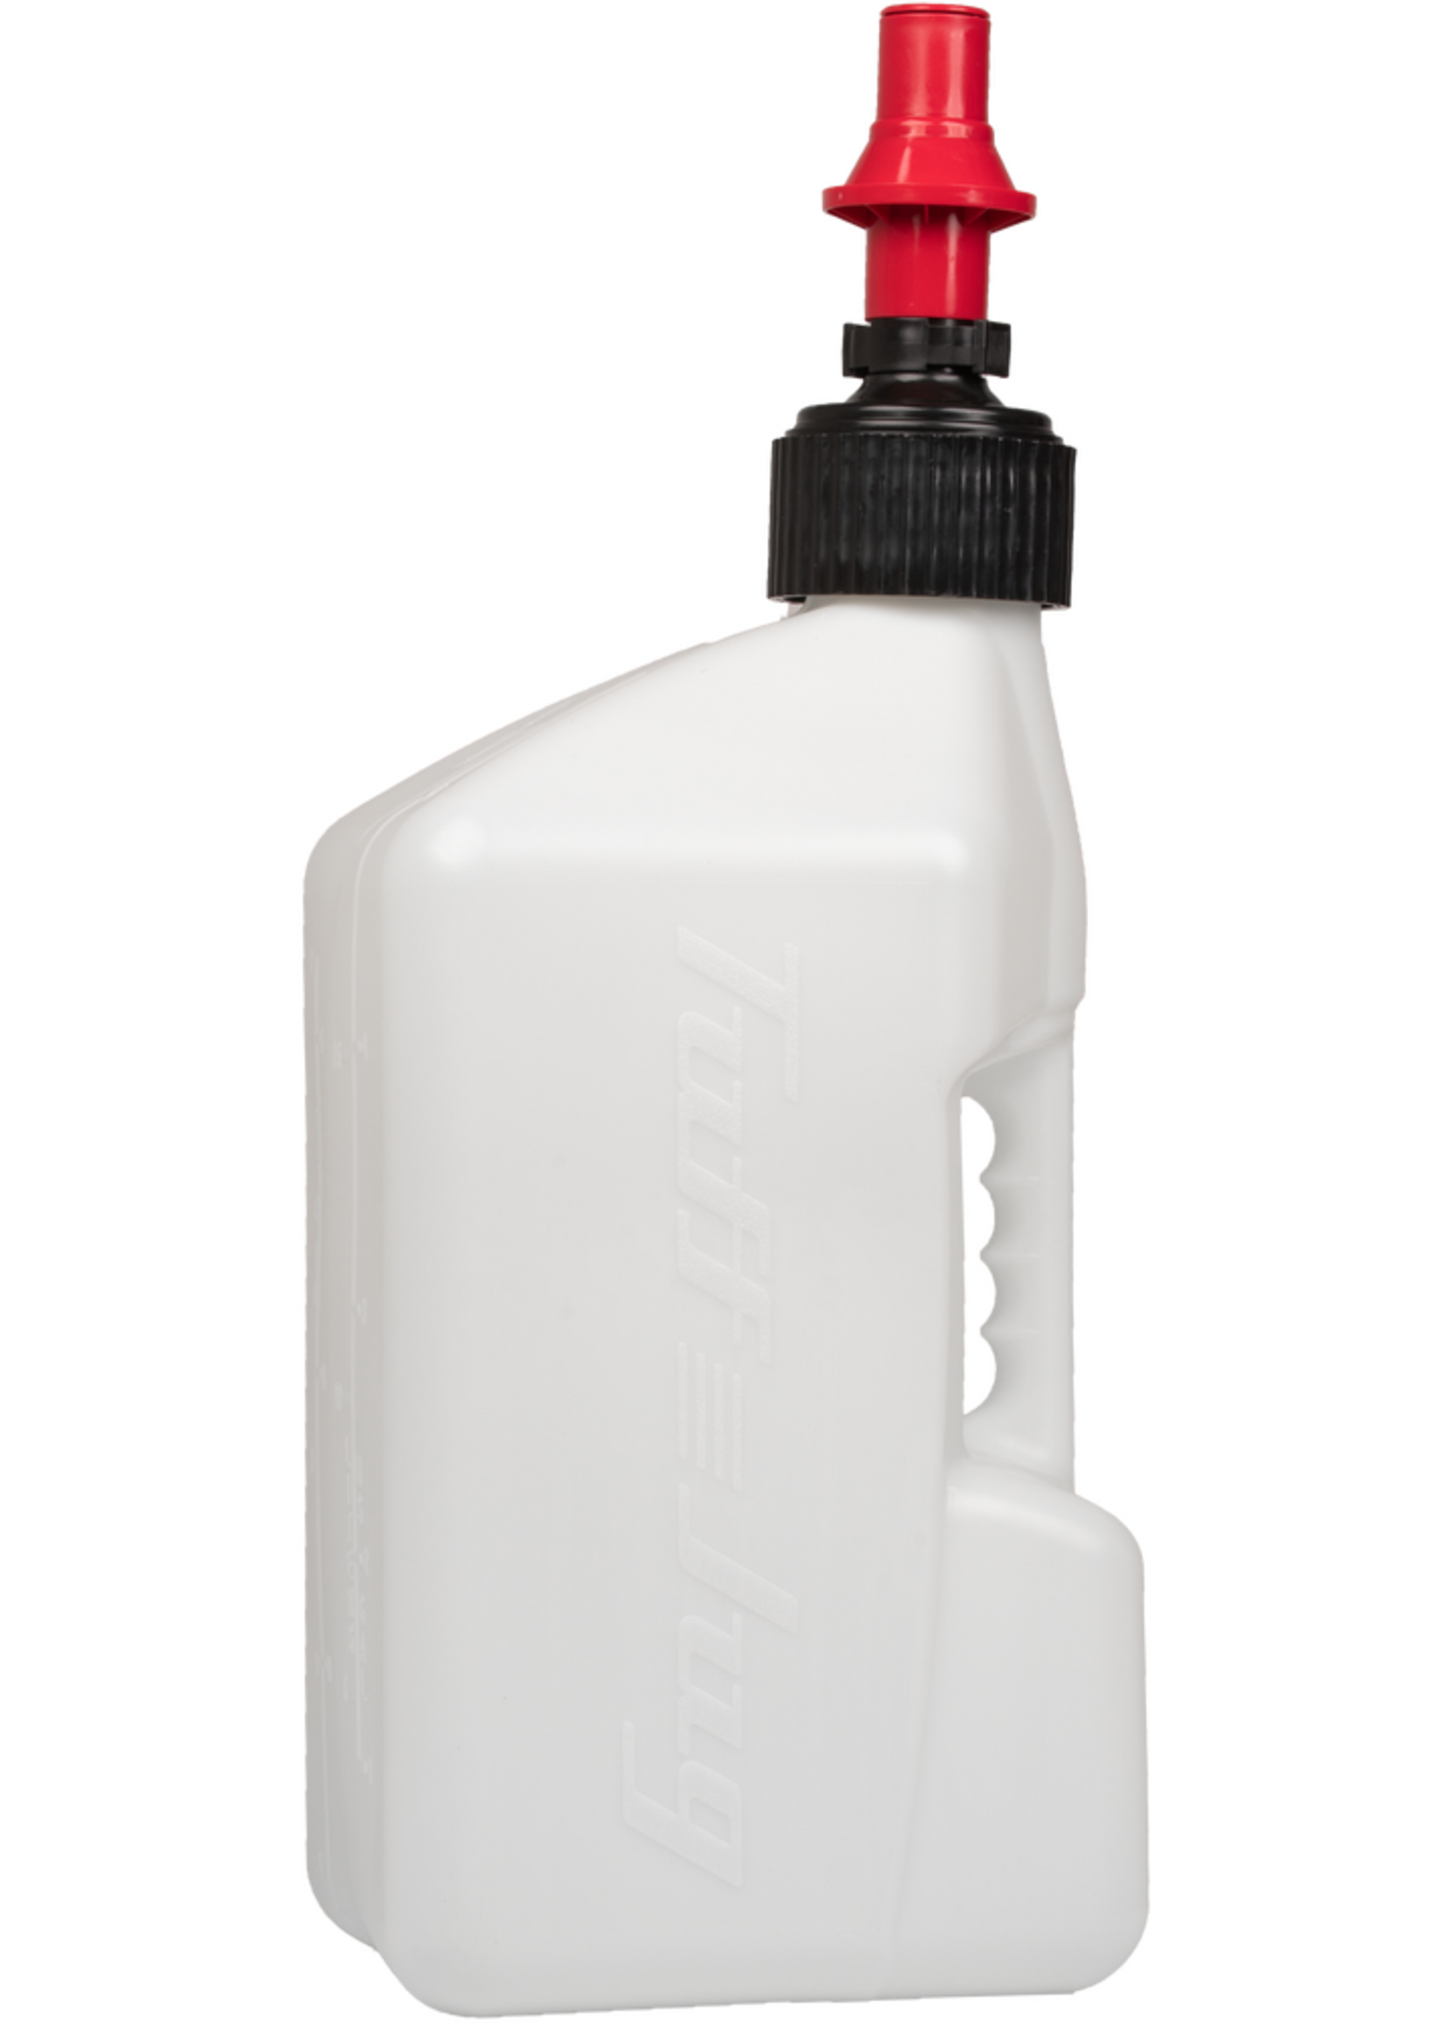 Tuff Jug White and Red 5-Gallon utility Container